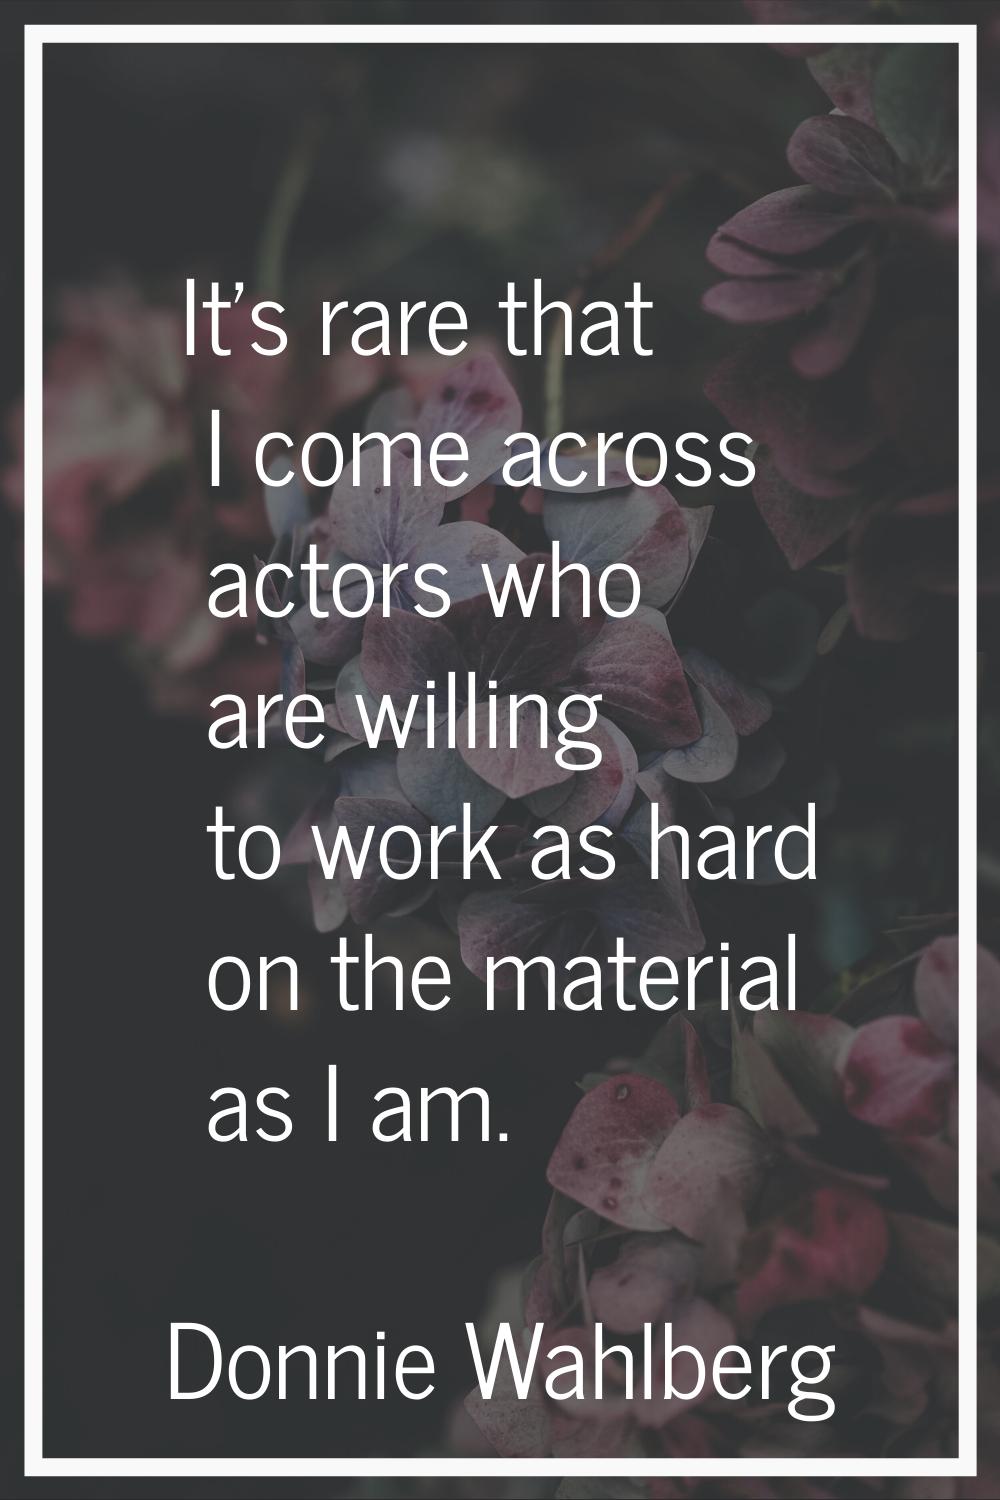 It's rare that I come across actors who are willing to work as hard on the material as I am.